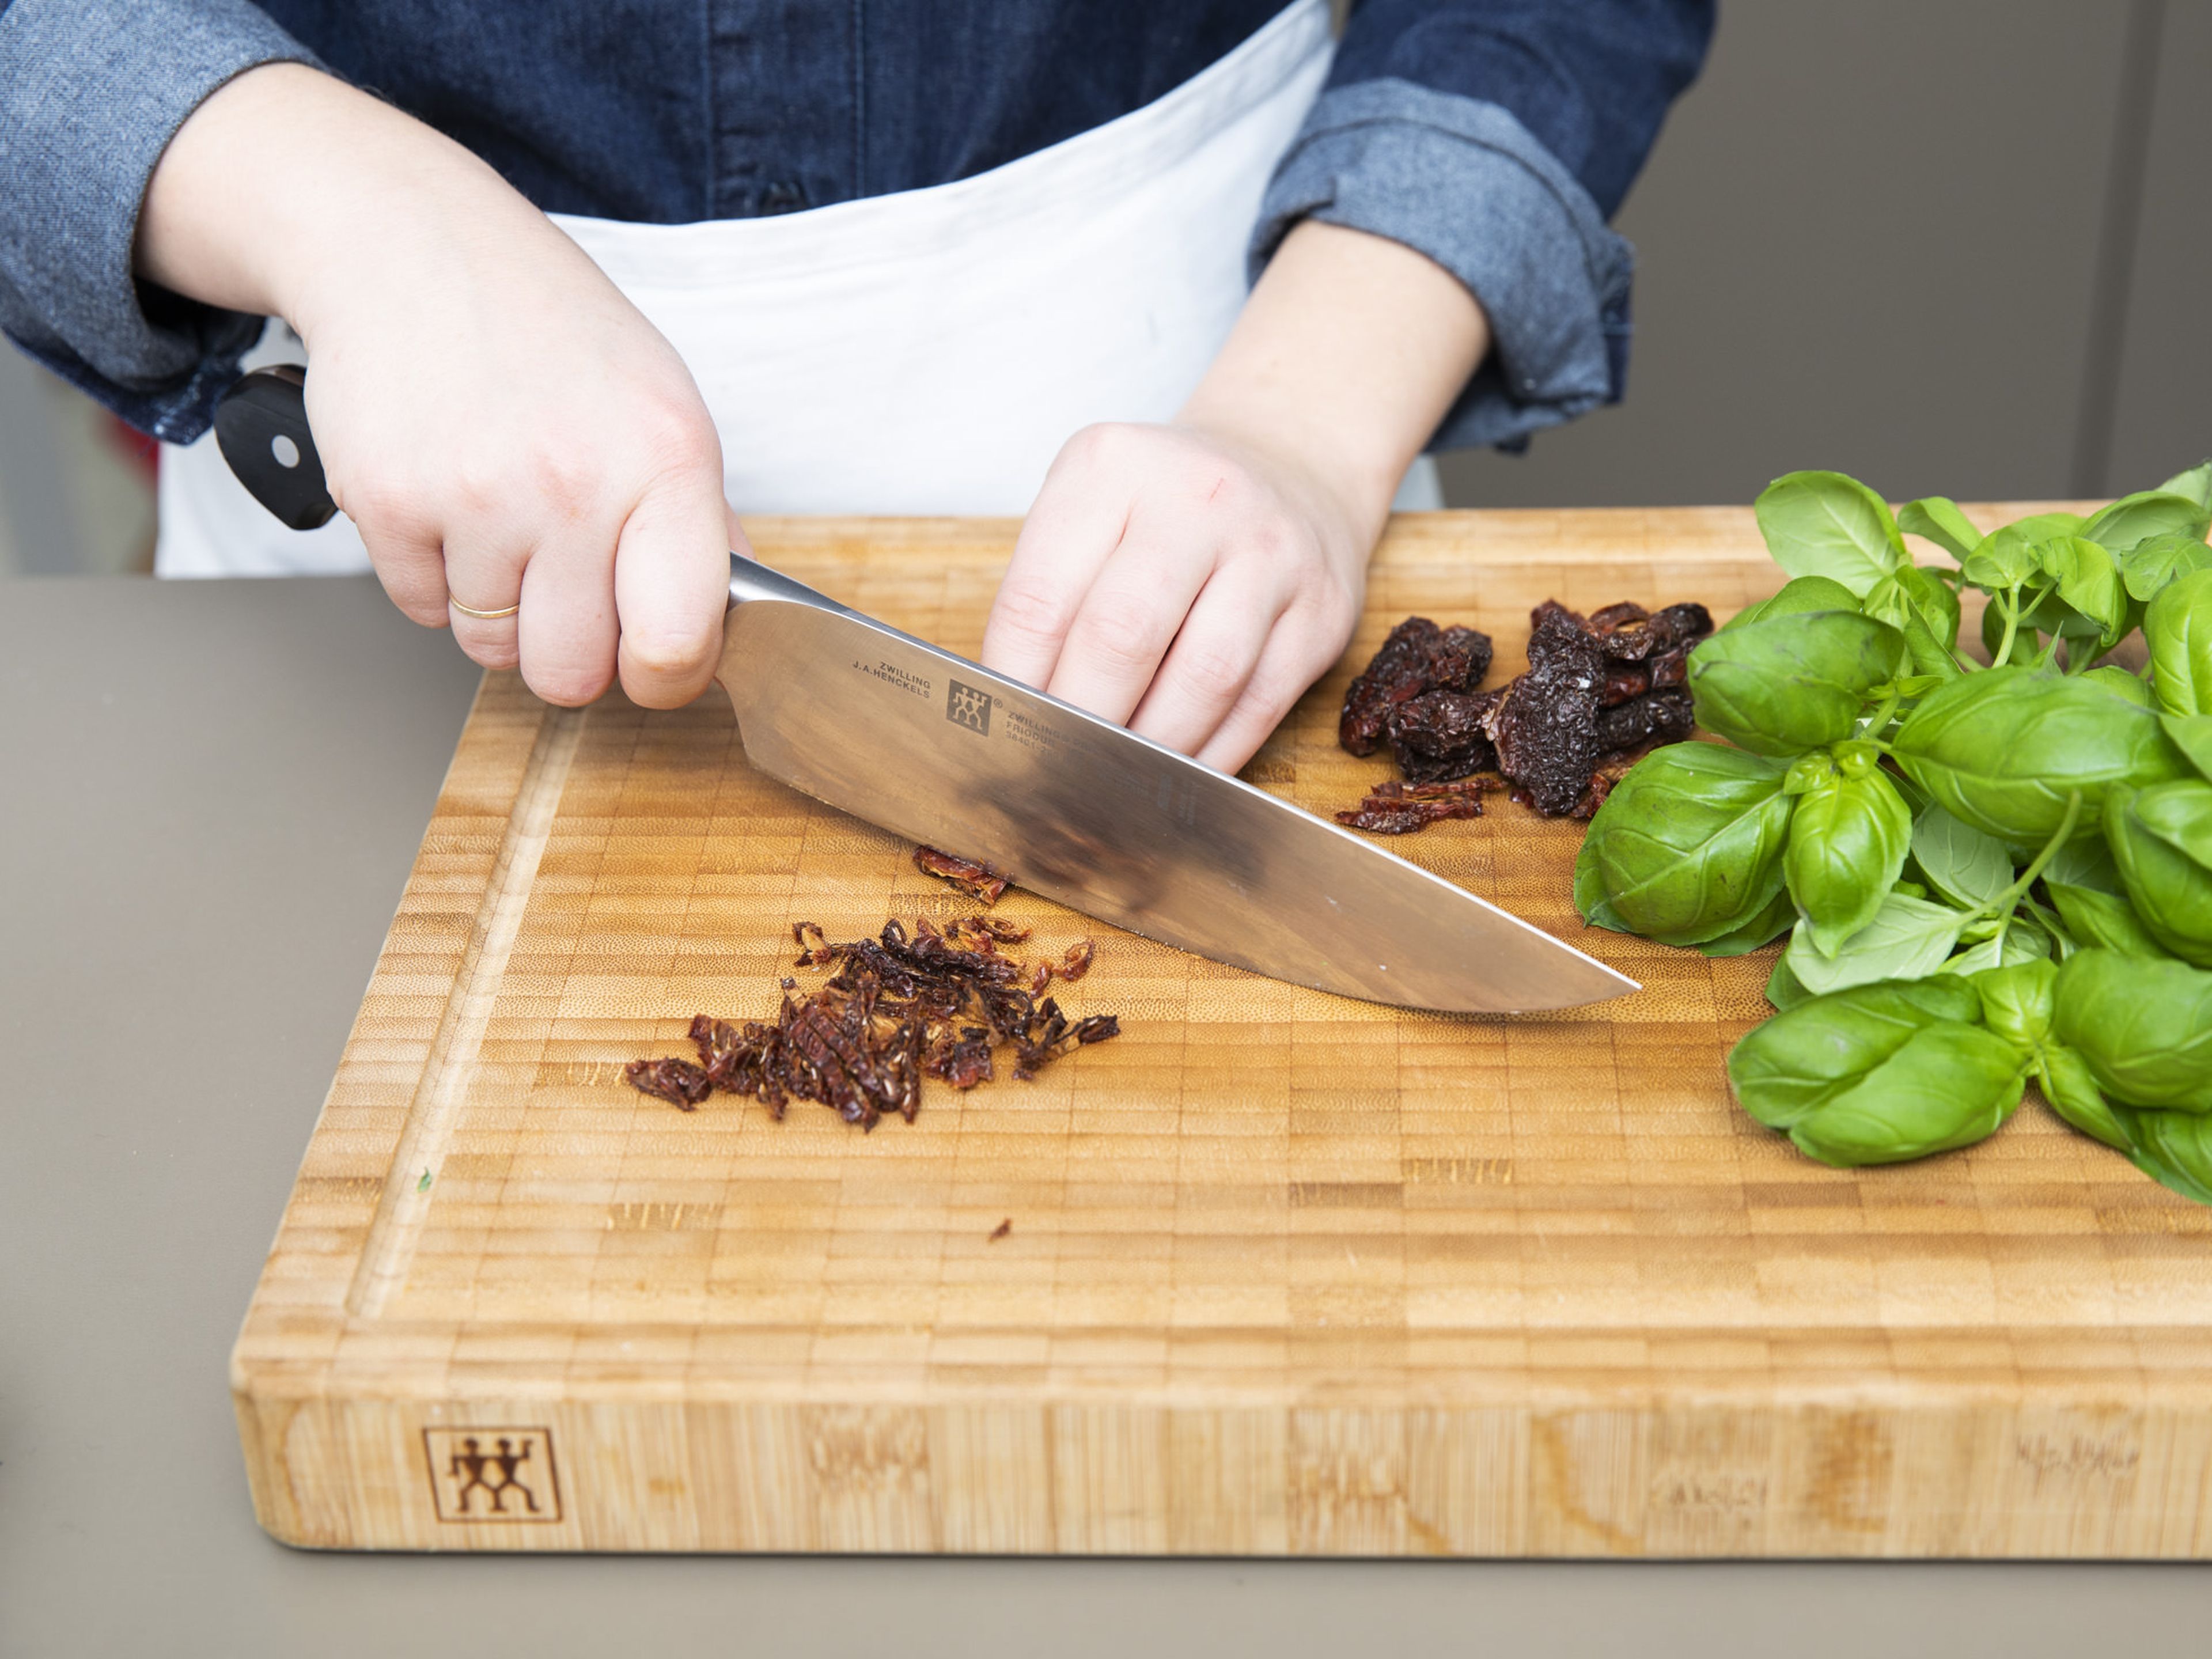 Finely chop the sun-dried tomatoes and basil. Add them to a bowl along with cooked risotto and mix well. Season with salt and pepper to taste. Spread the Risotto on a baking tray, roughly 1cm thick, cover with foil and chill in the fridge for approx. 30 min.